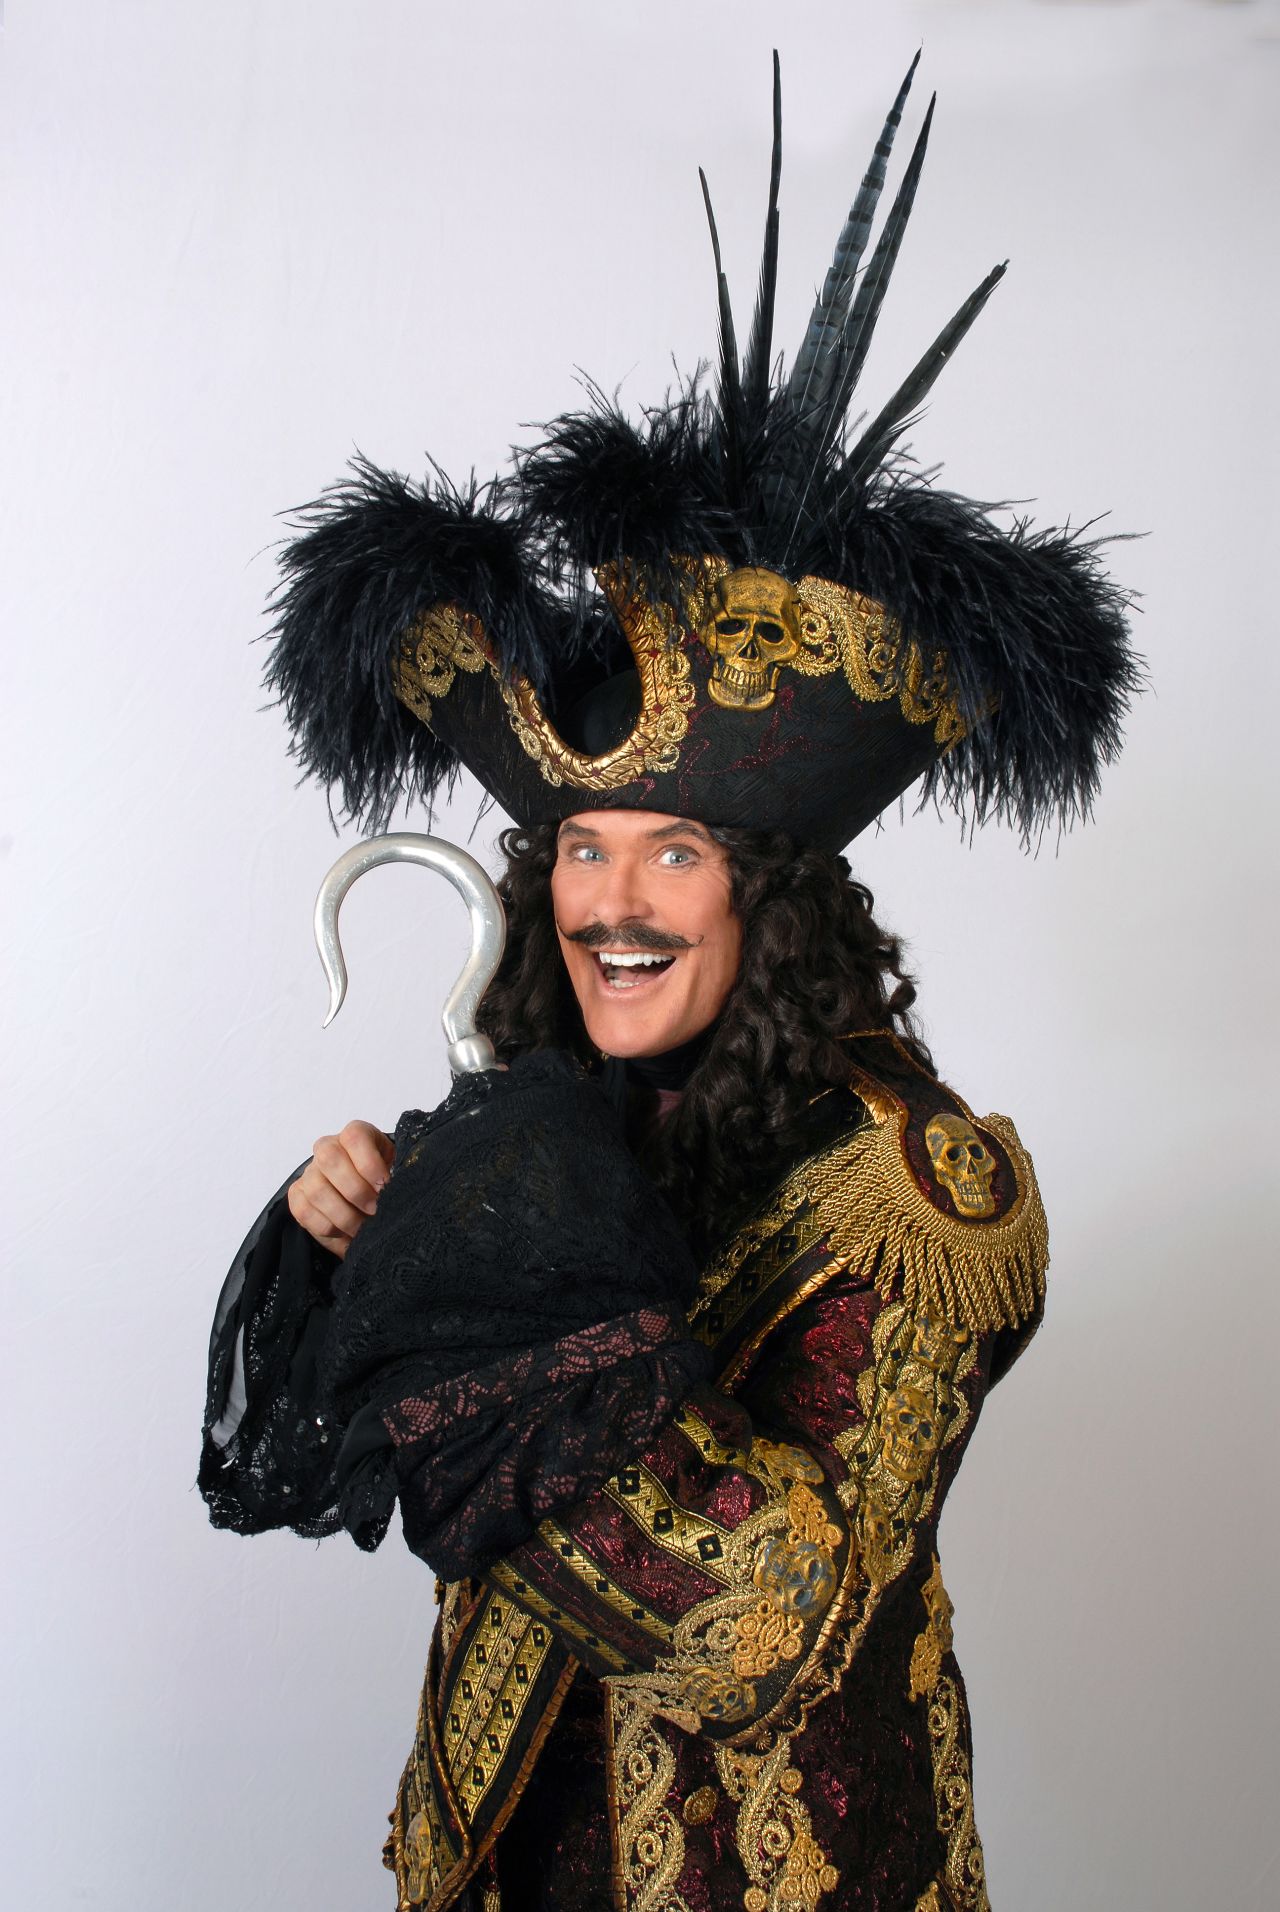 David Hasselhoff debuts in pantomime as Captain Hook in "Peter Pan" at the New Wimbledon Theatre (2010).